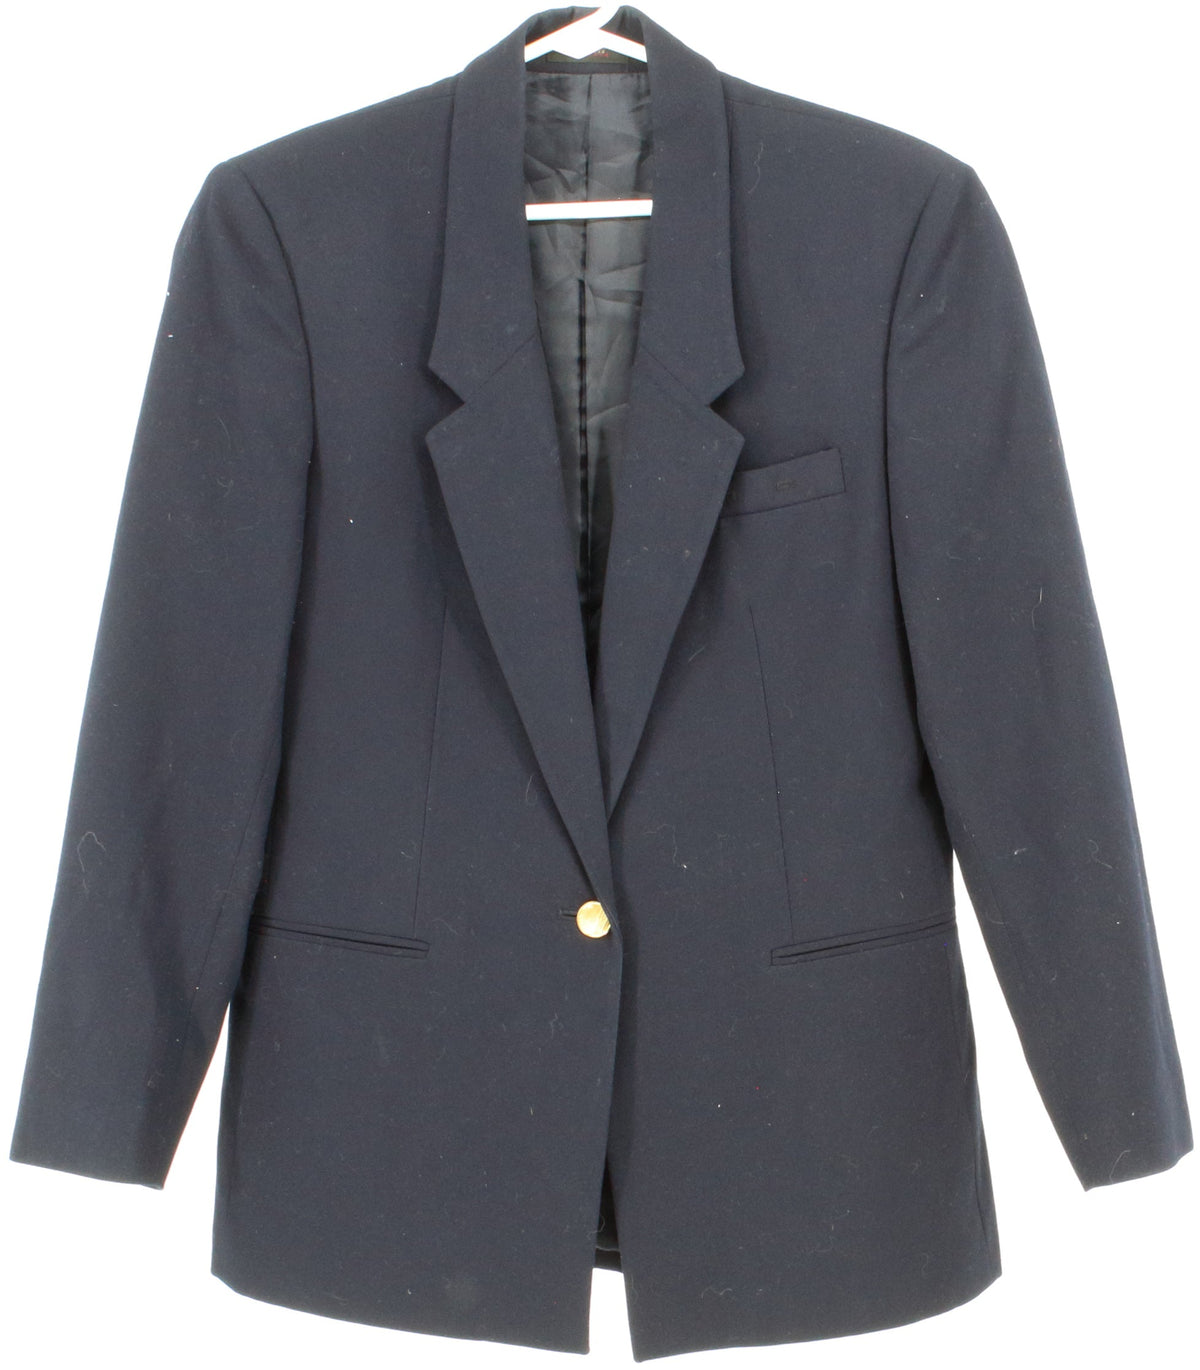 R&R Navy Blue Women's Wool Blazer With Gold Buttons